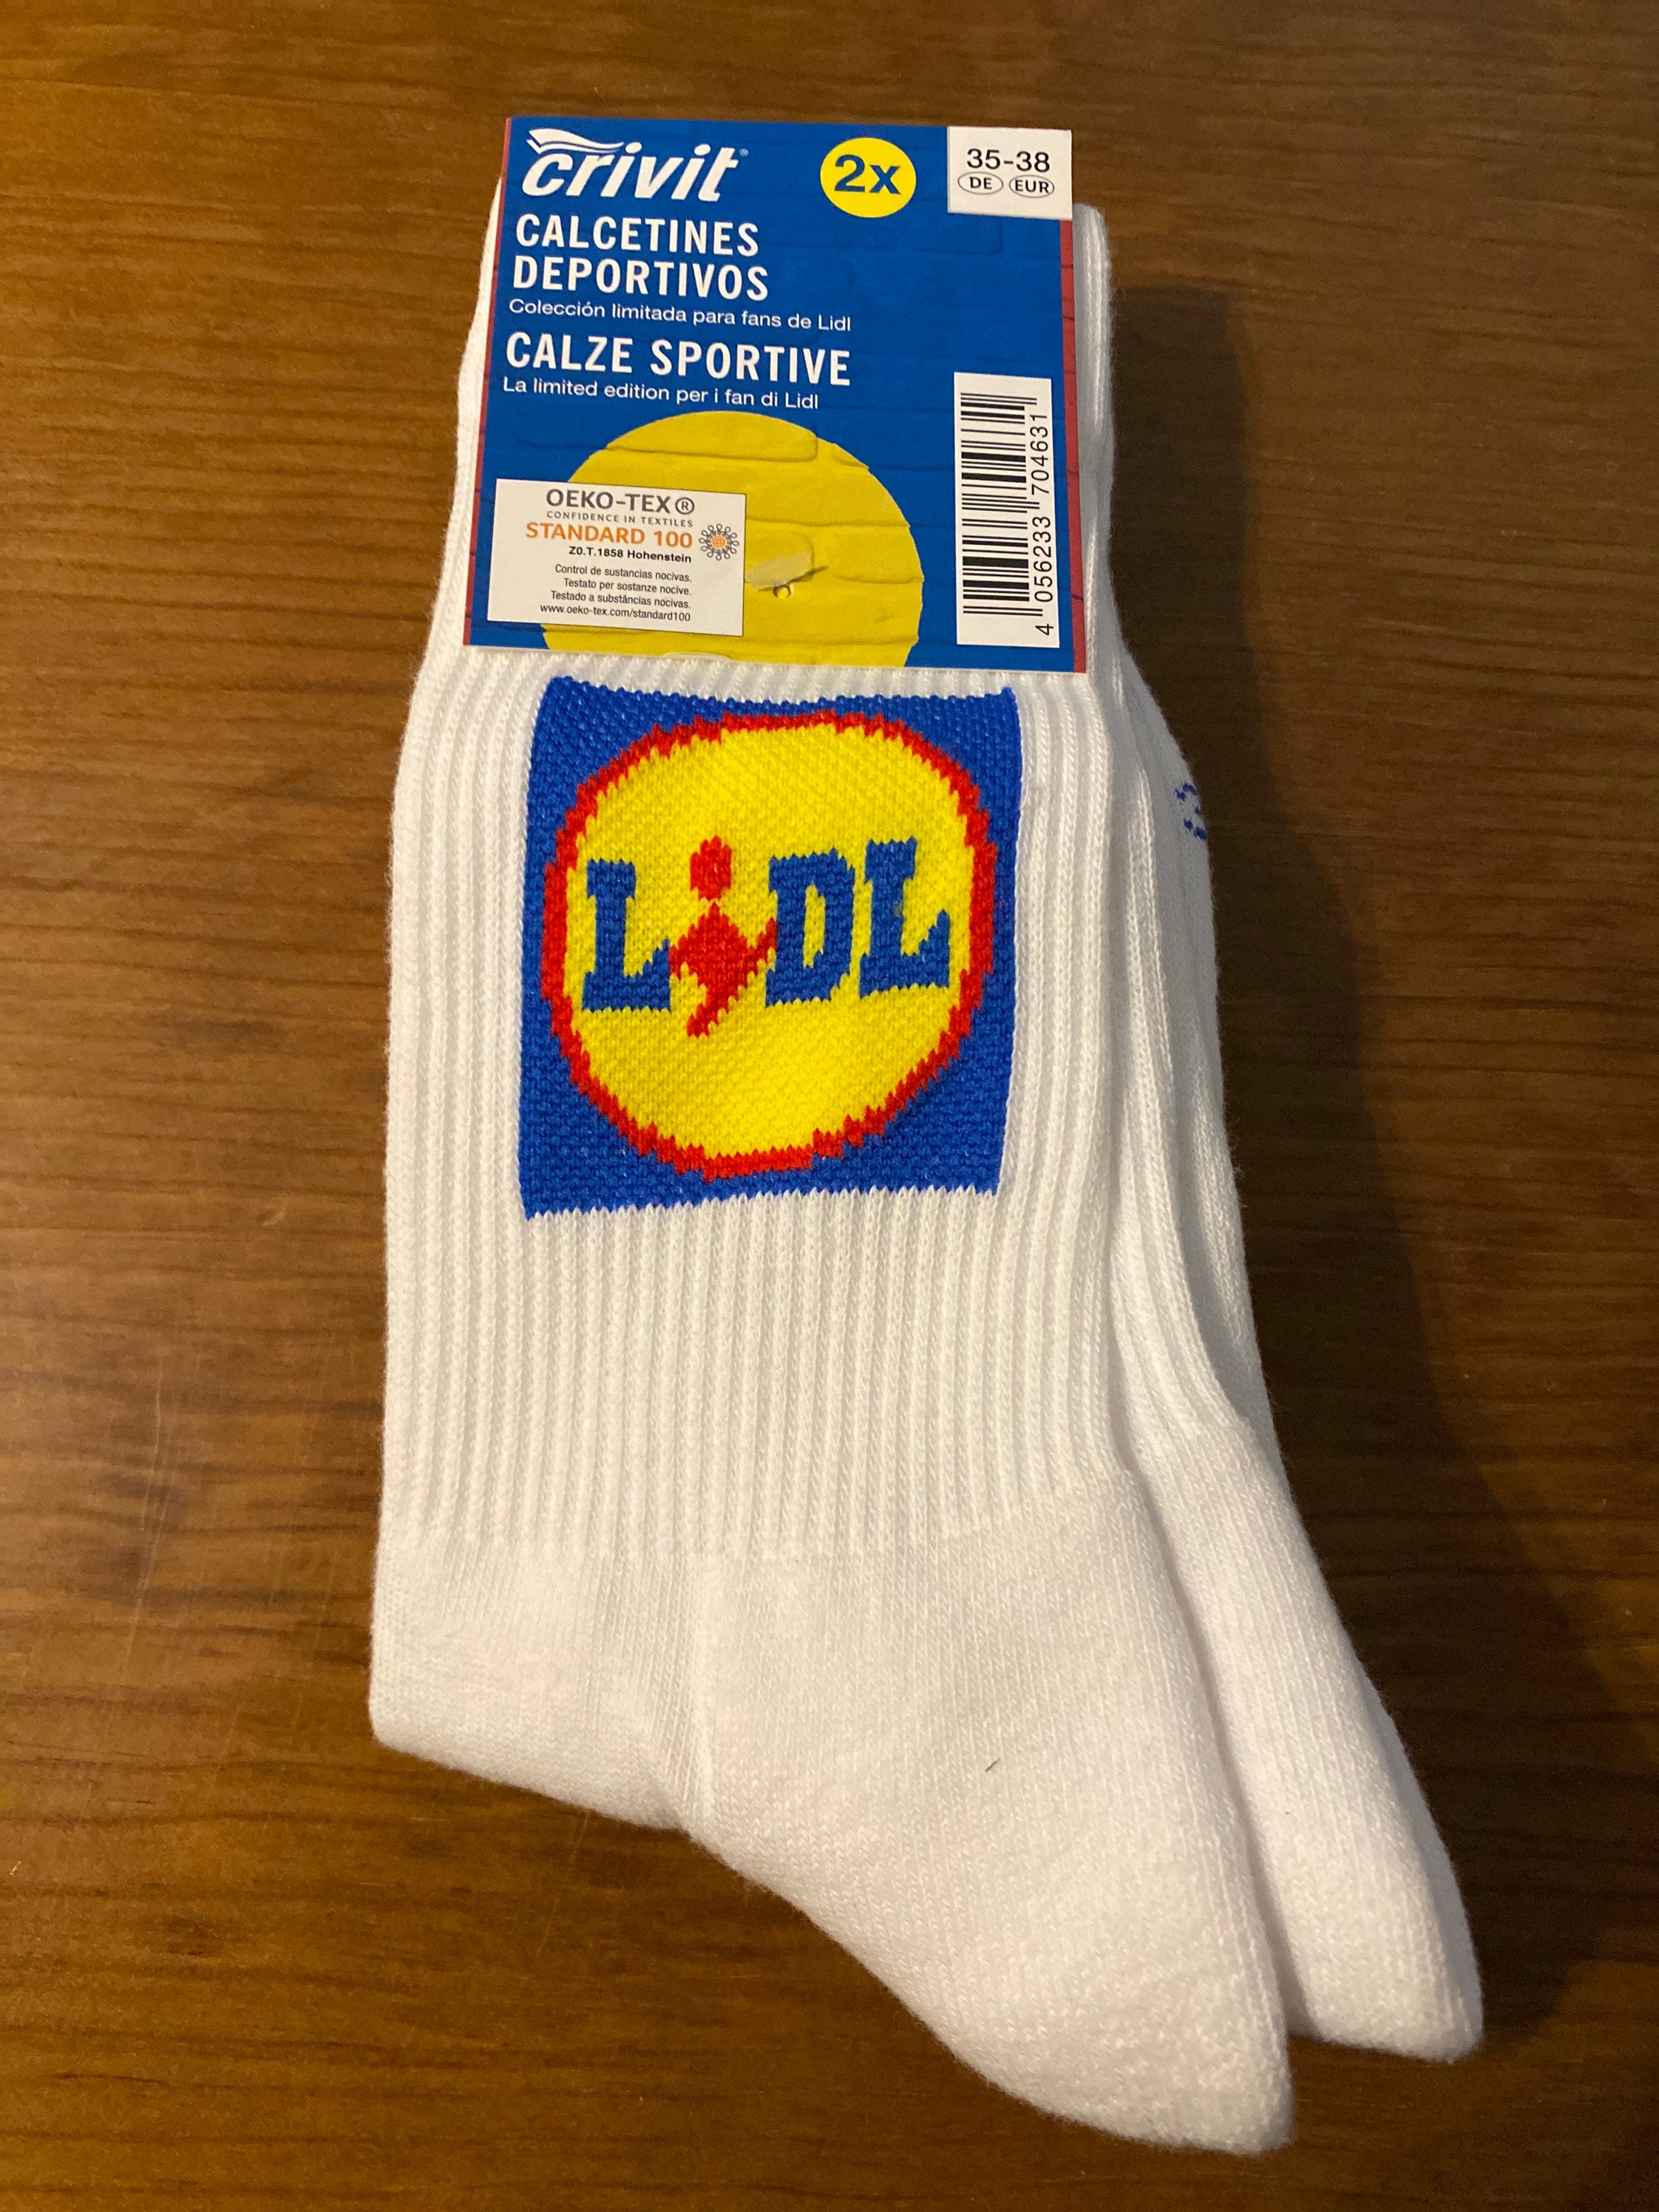 Lidl sports shoes for men and women - Lithuania, New - The